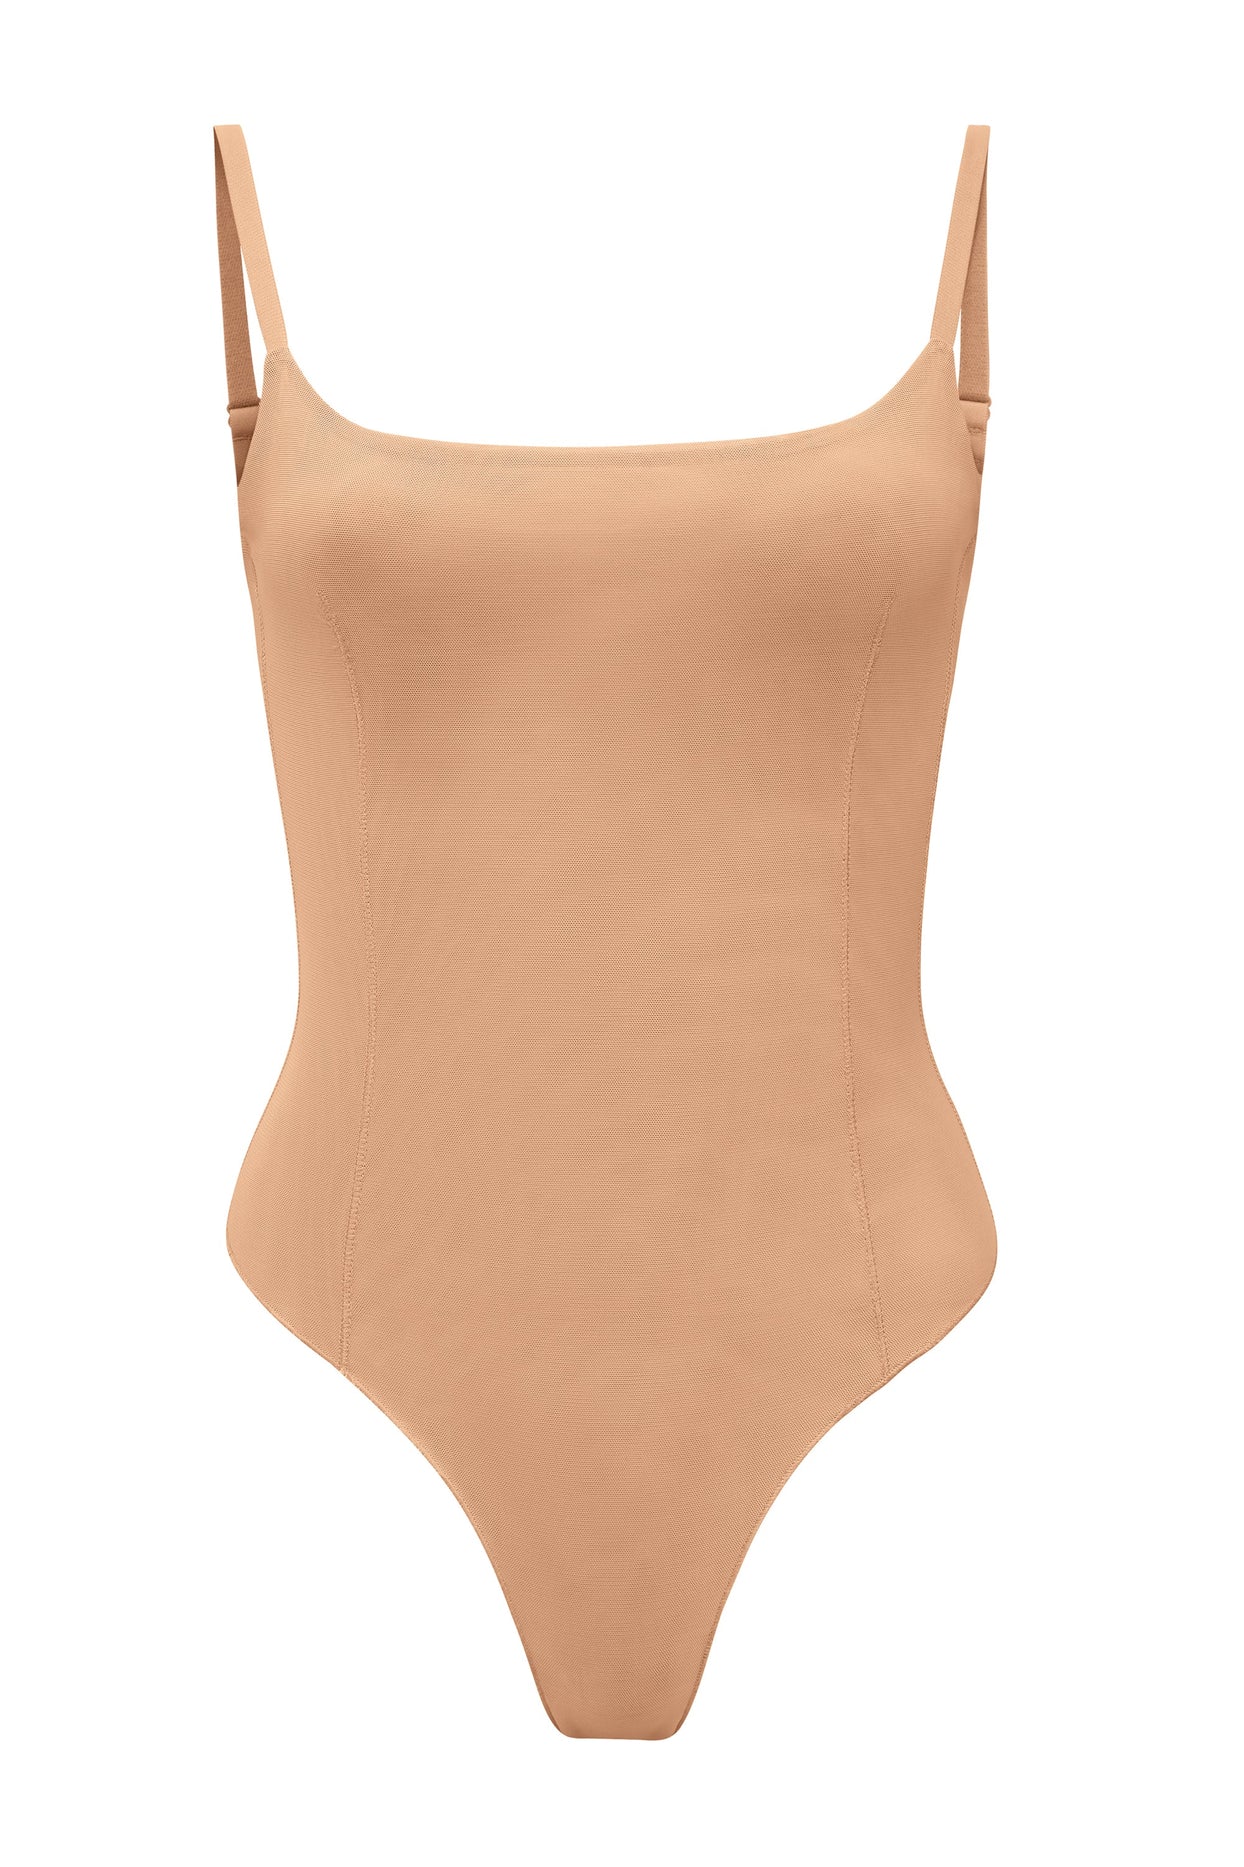 Peachy Shapewear - Our new edition to our backless shapewear